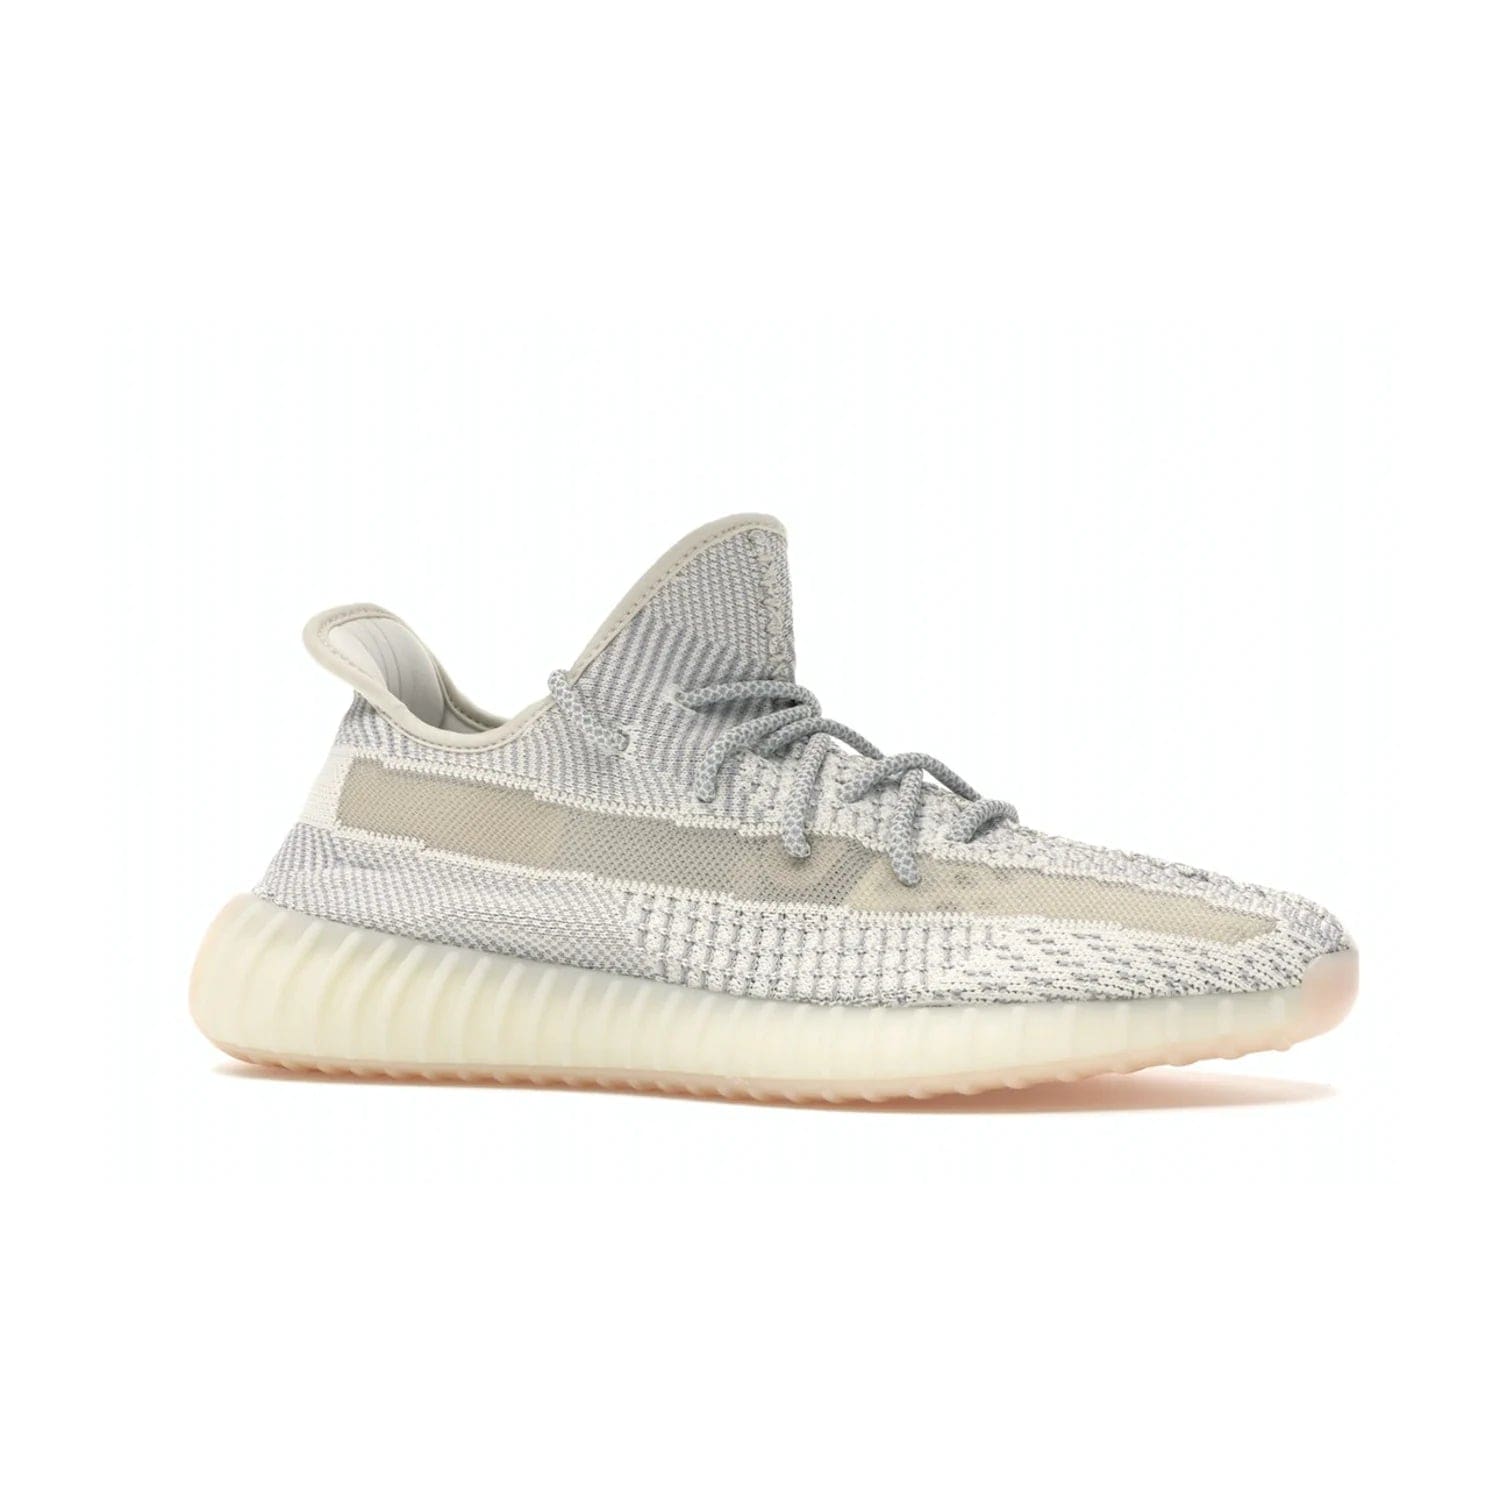 adidas Yeezy Boost 350 V2 Lundmark (Non Reflective) - Image 3 - Only at www.BallersClubKickz.com - Shop the exclusive adidas Yeezy Boost 350 V2 Lundmark with a subtle summer color, mesh upper, white-to-cream transitional midsole, light tan outsole, and pink middle stripe. Comfort and style come together in this perfect summer 350 V2. Released on July 11, 2019.